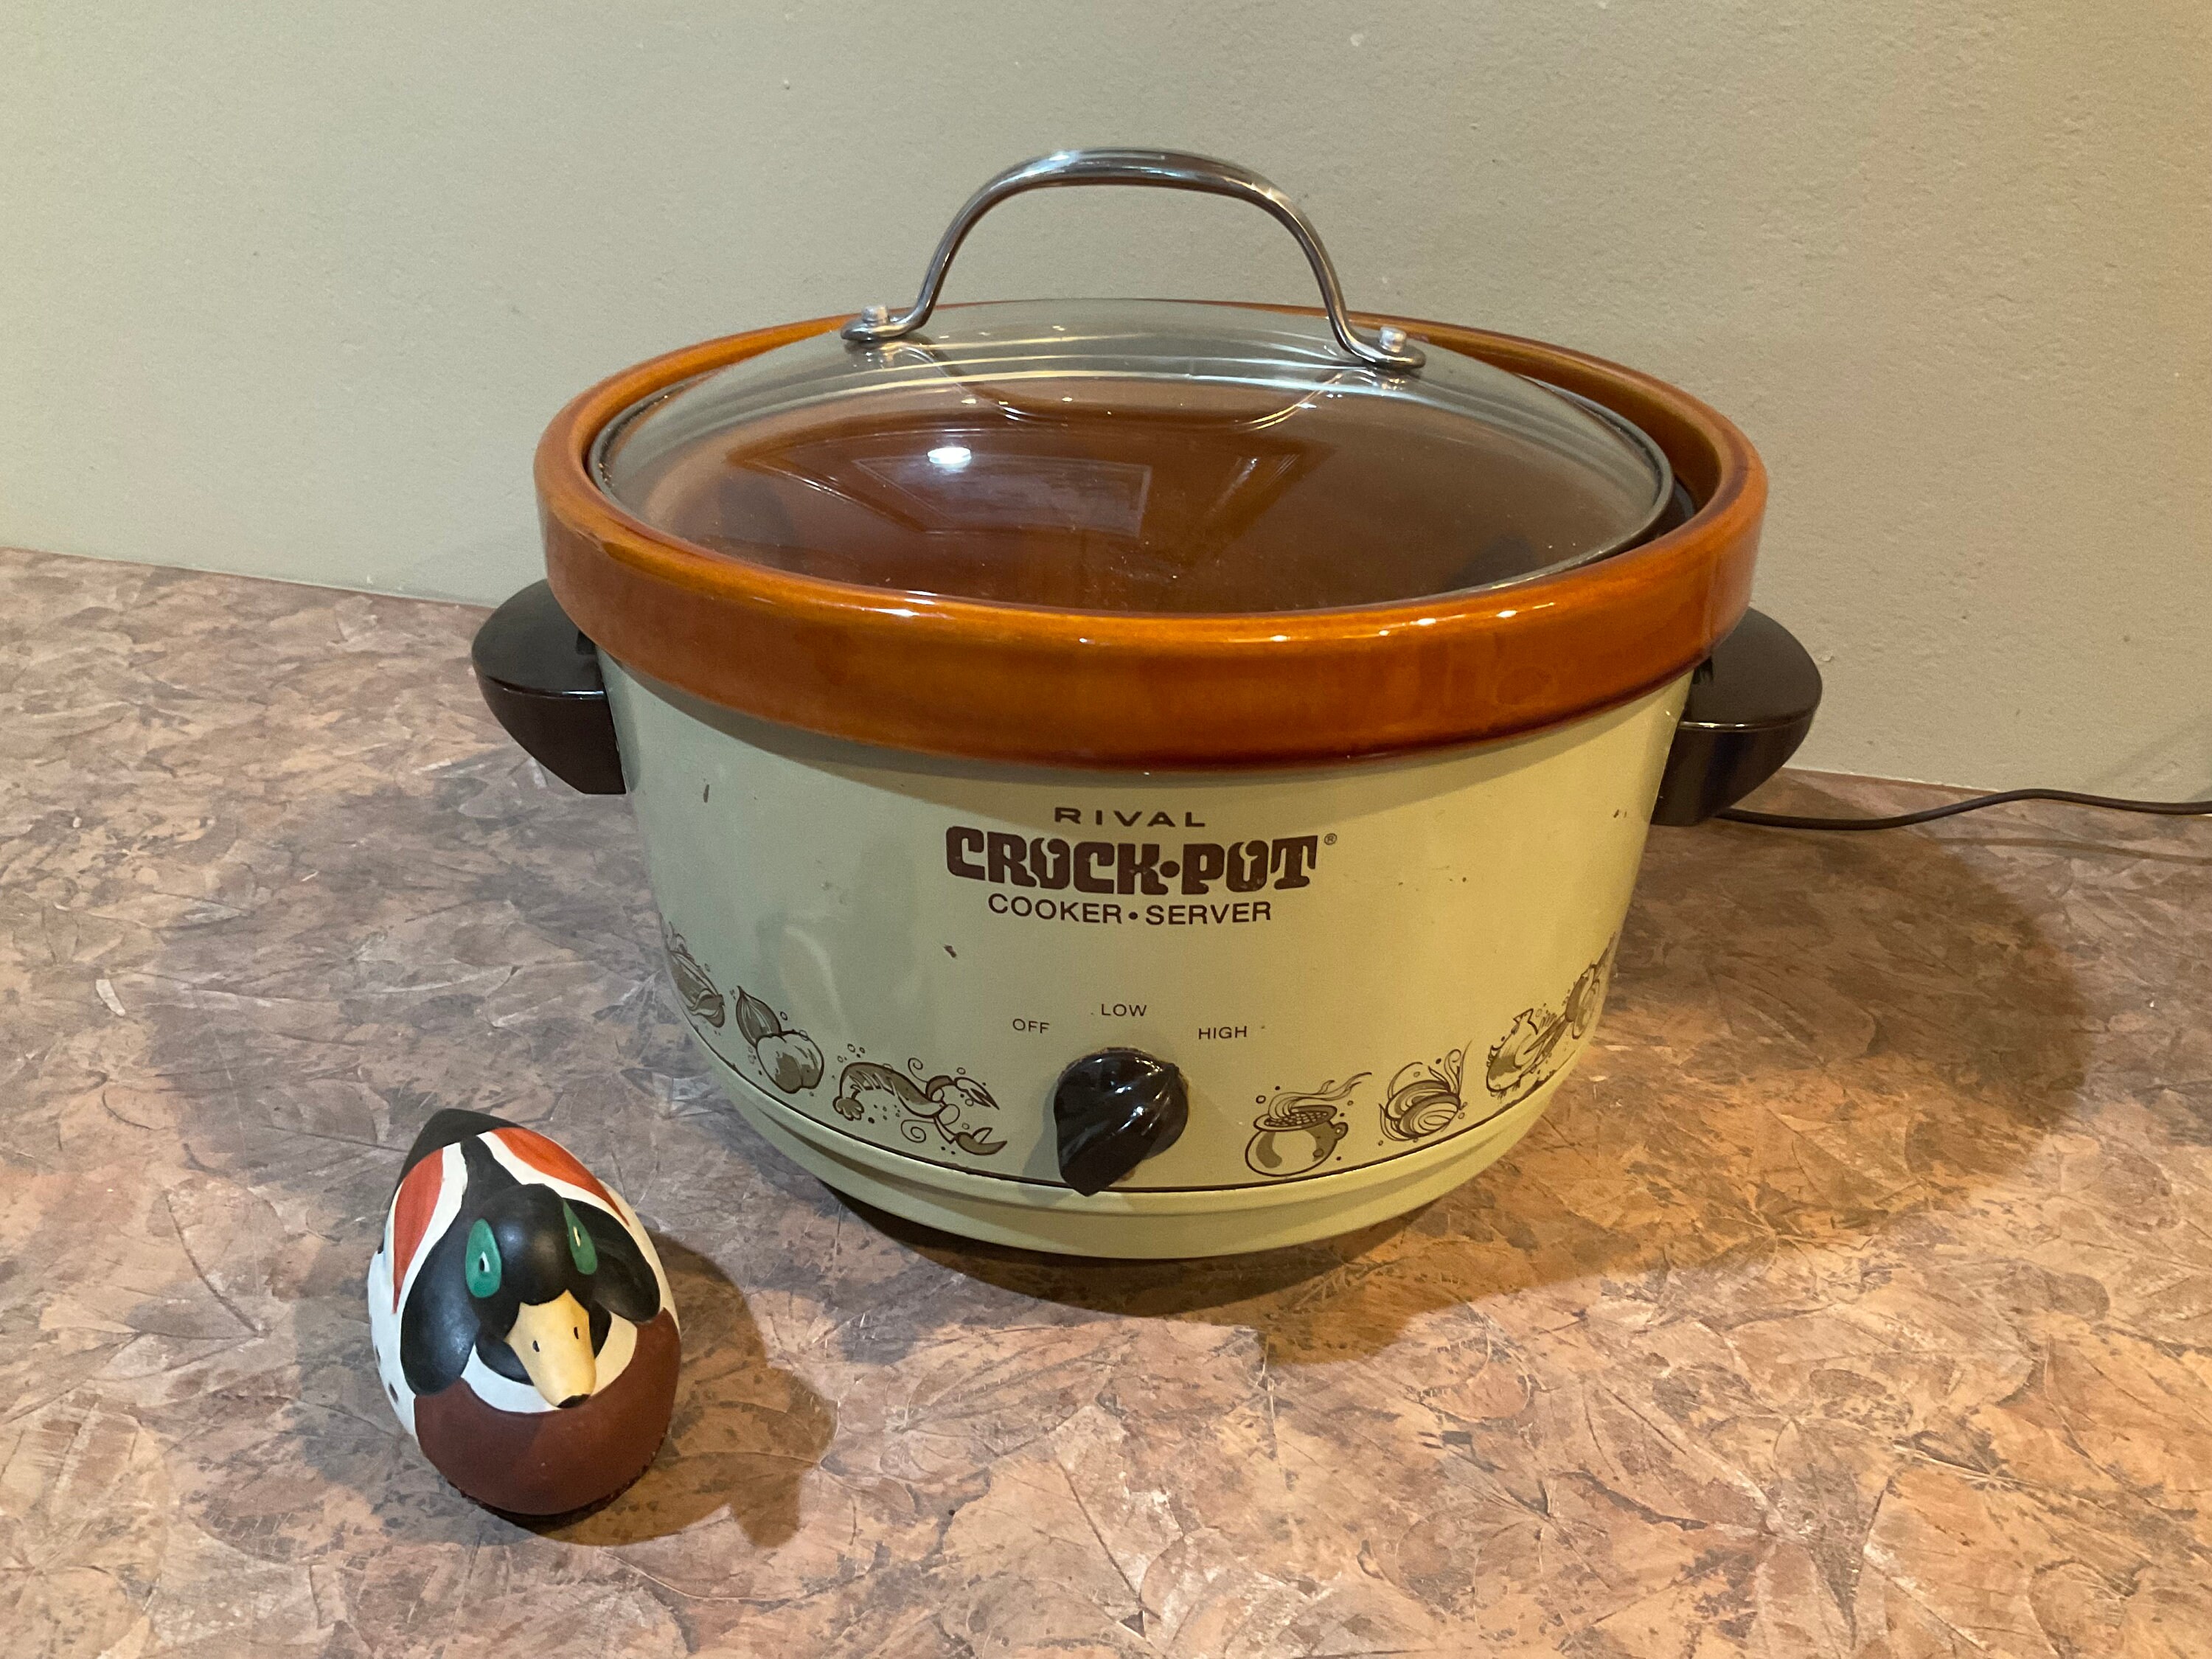 Vintage RIVAL Crockpot 3150 Slow Cooker with Vegetable Pattern and Lid